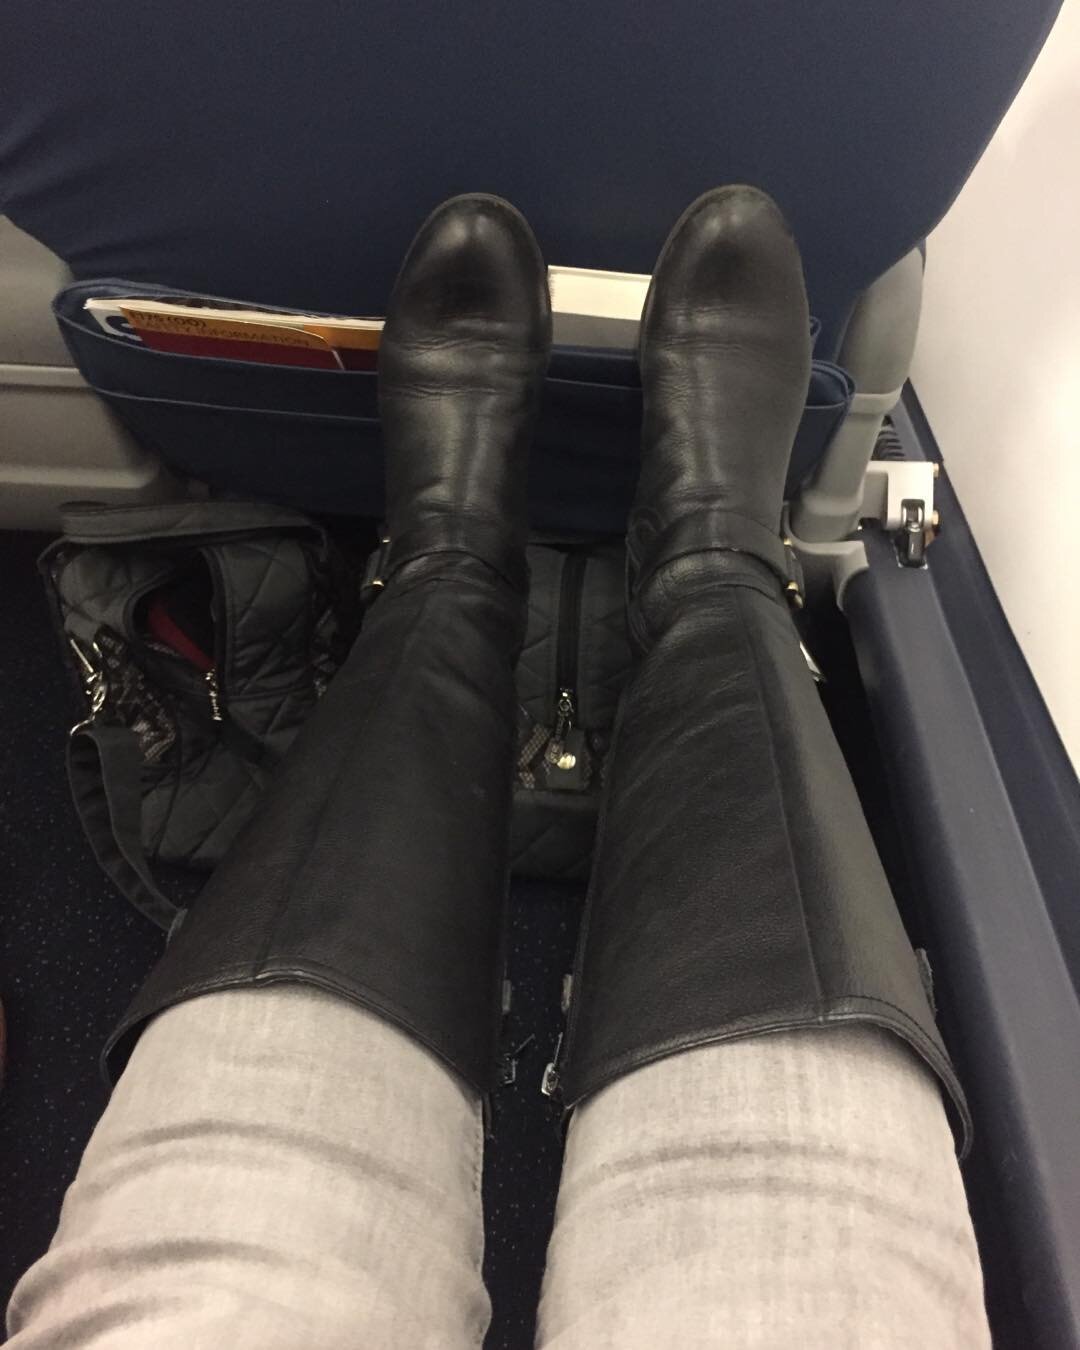 Thank you Delta for the leg room!